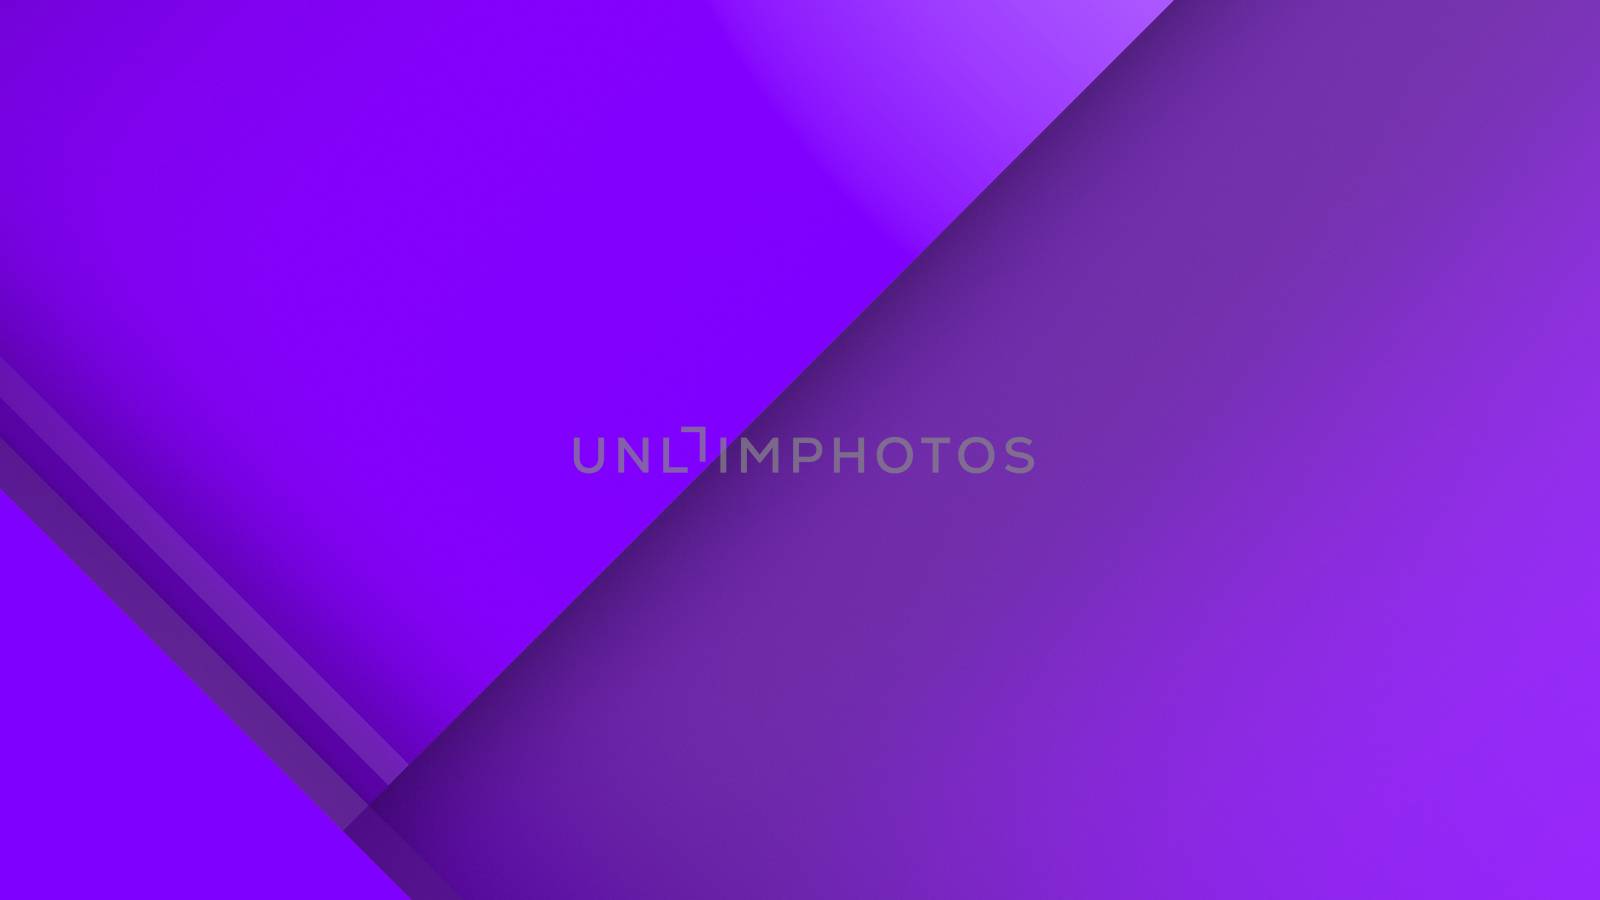 Diagonal violet dynamic stripes on color background. Modern abstract 3d render background with lines and dark shadows